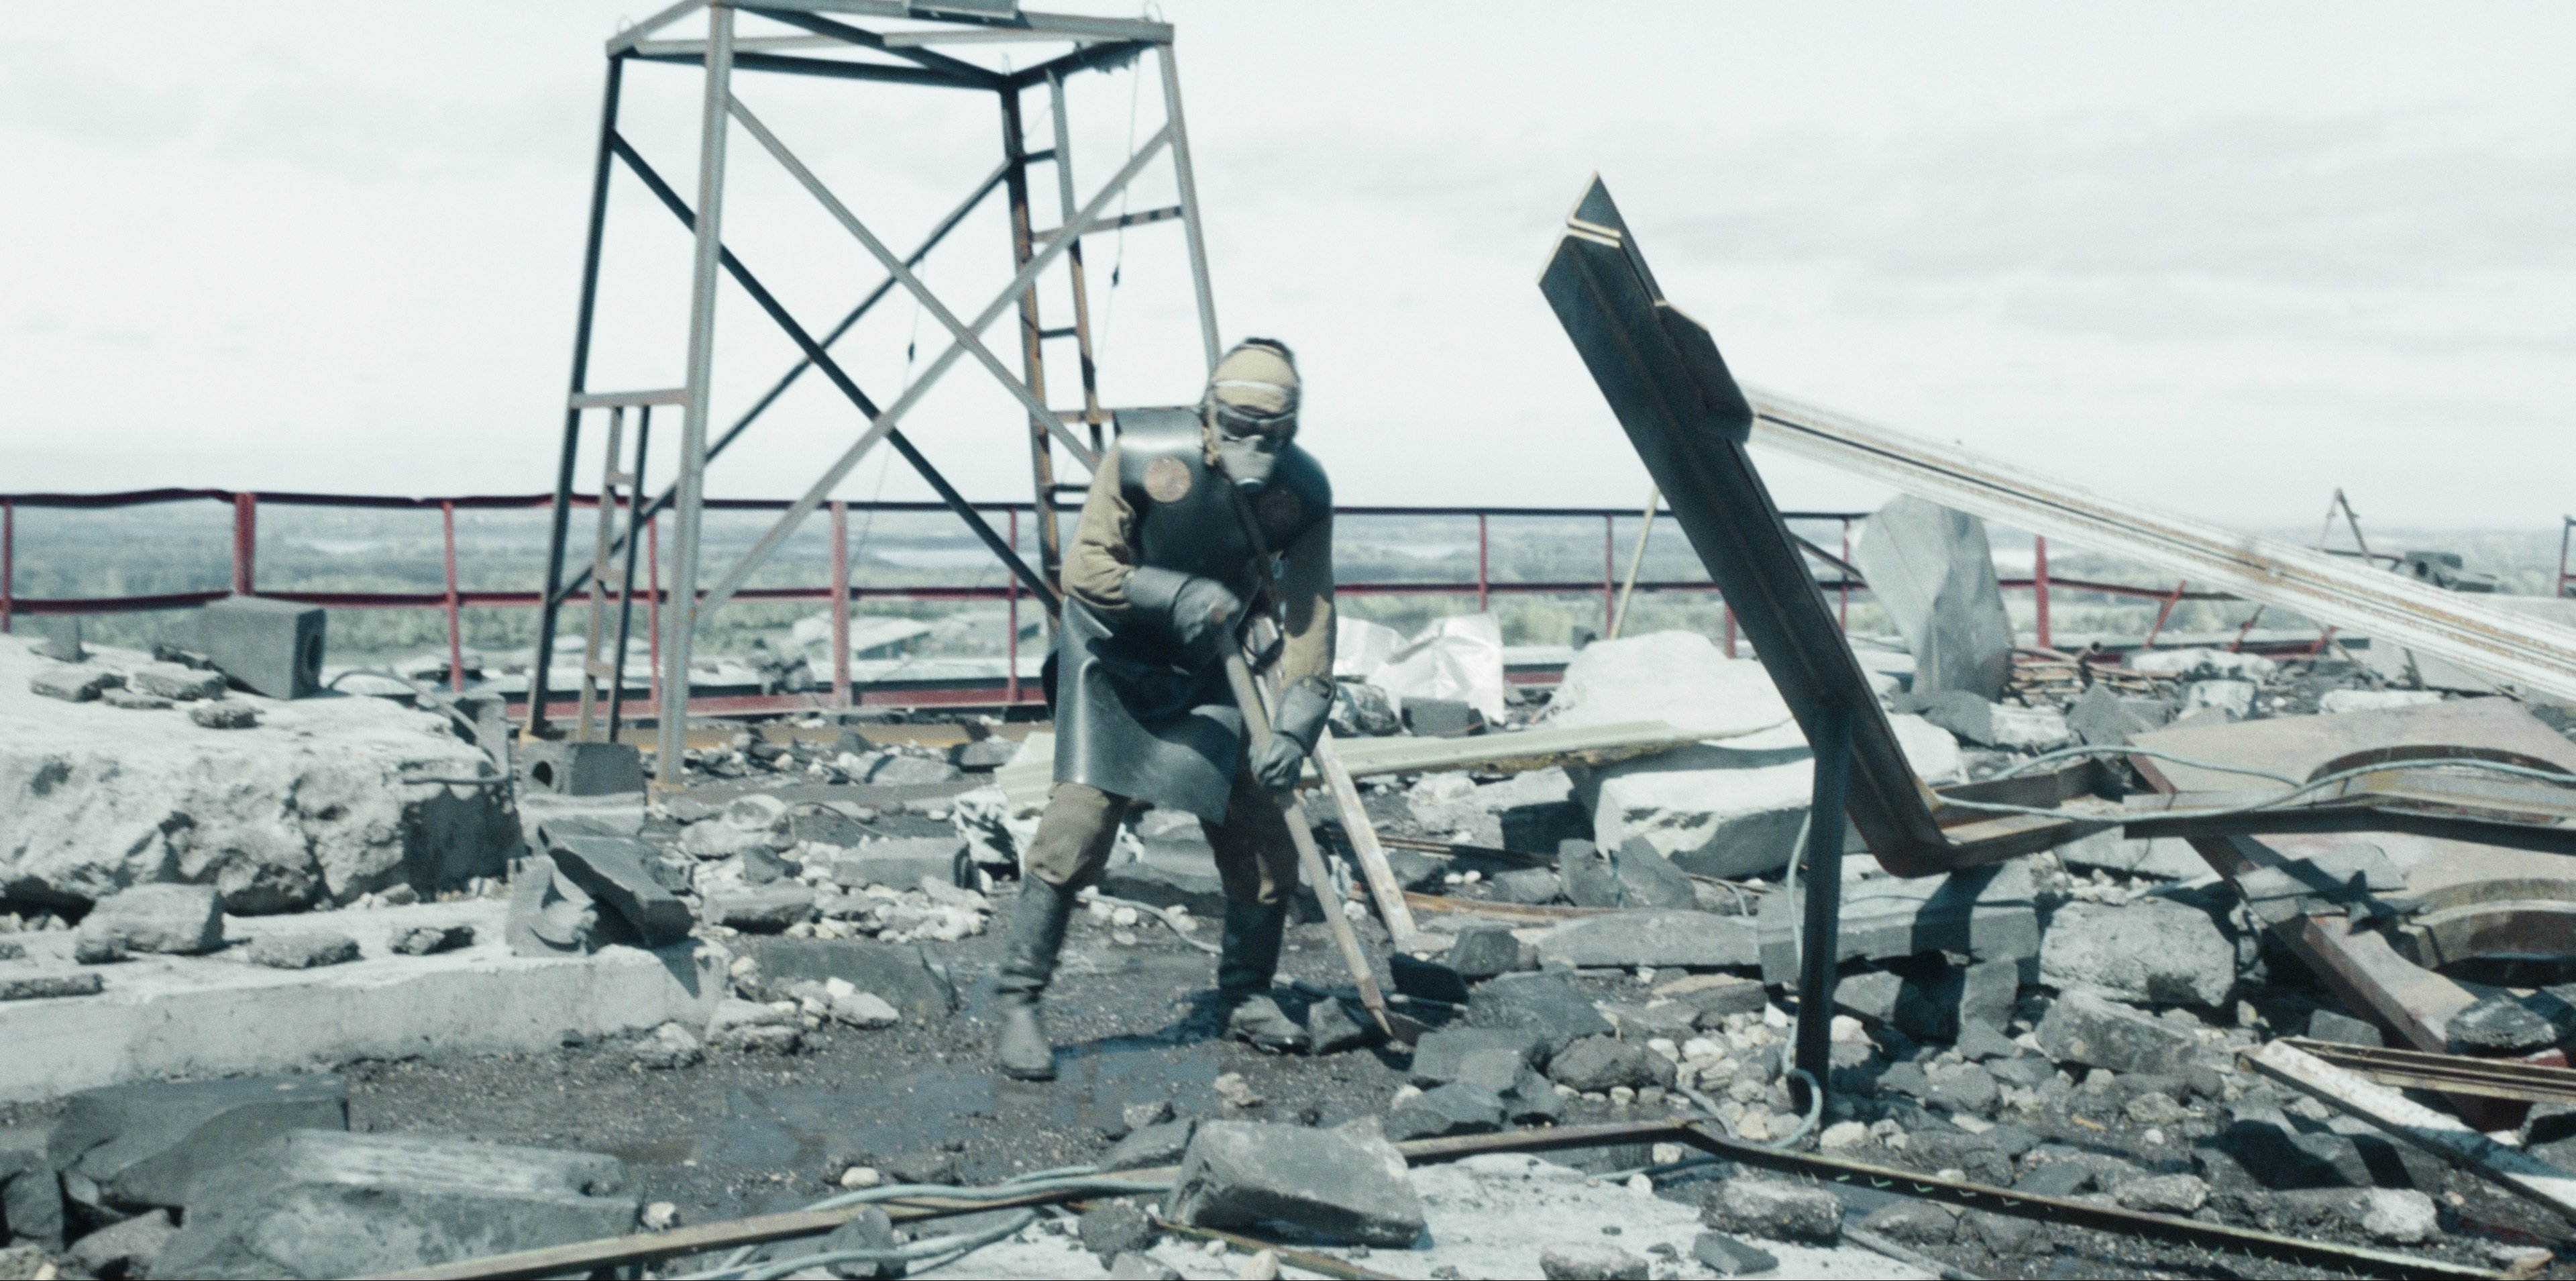 Person in protective gear kneels among industrial debris with a structure in the background